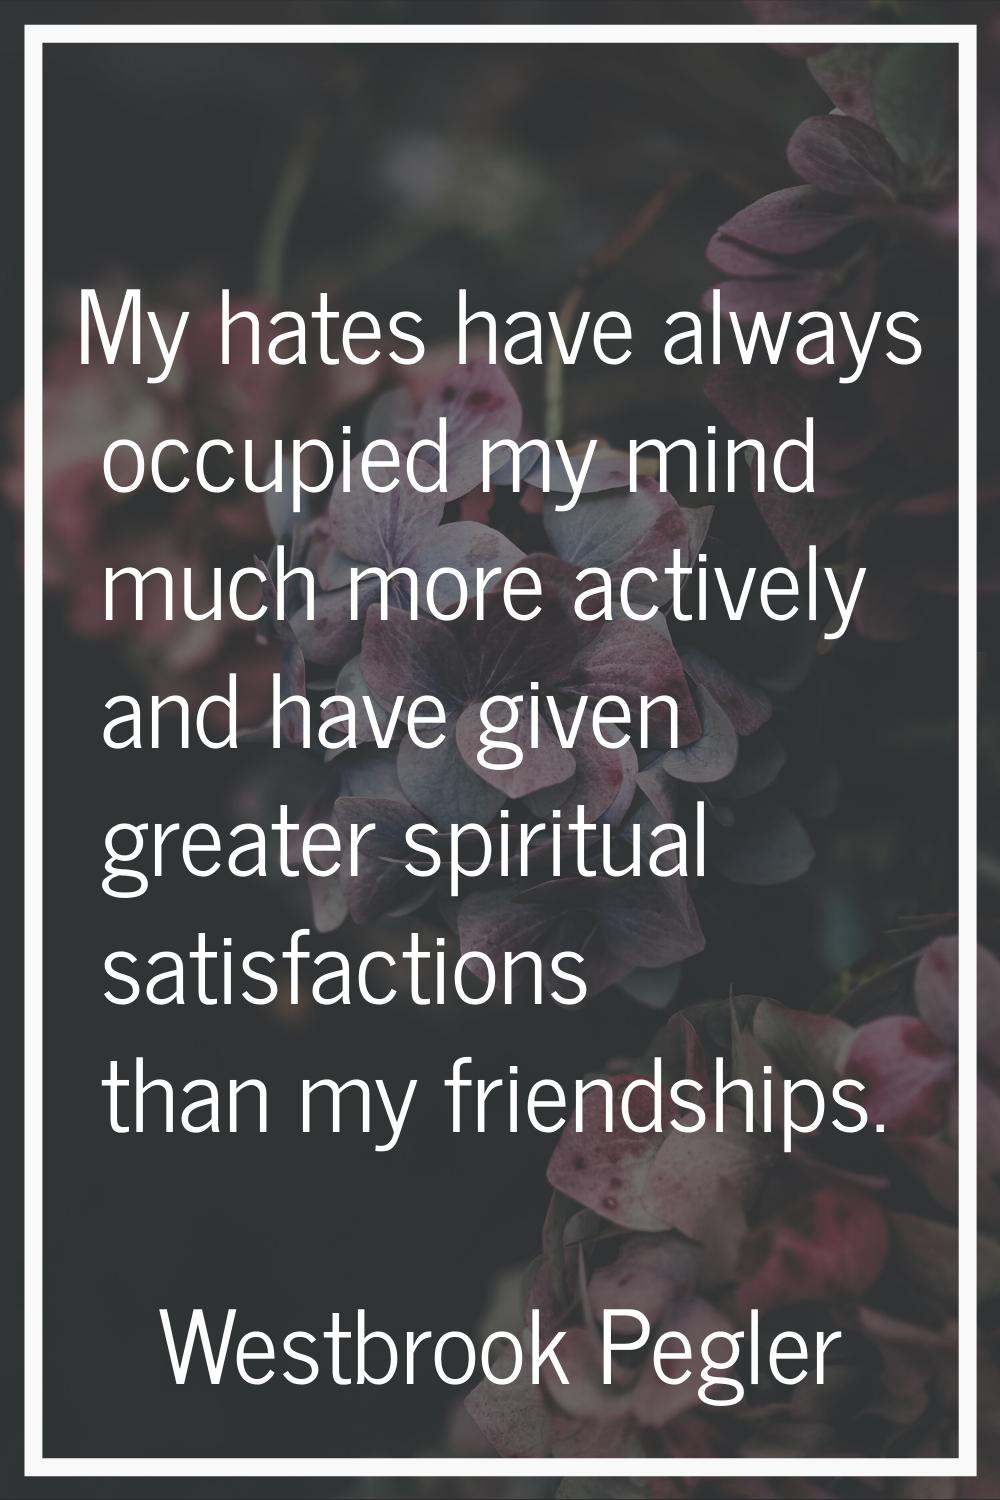 My hates have always occupied my mind much more actively and have given greater spiritual satisfact